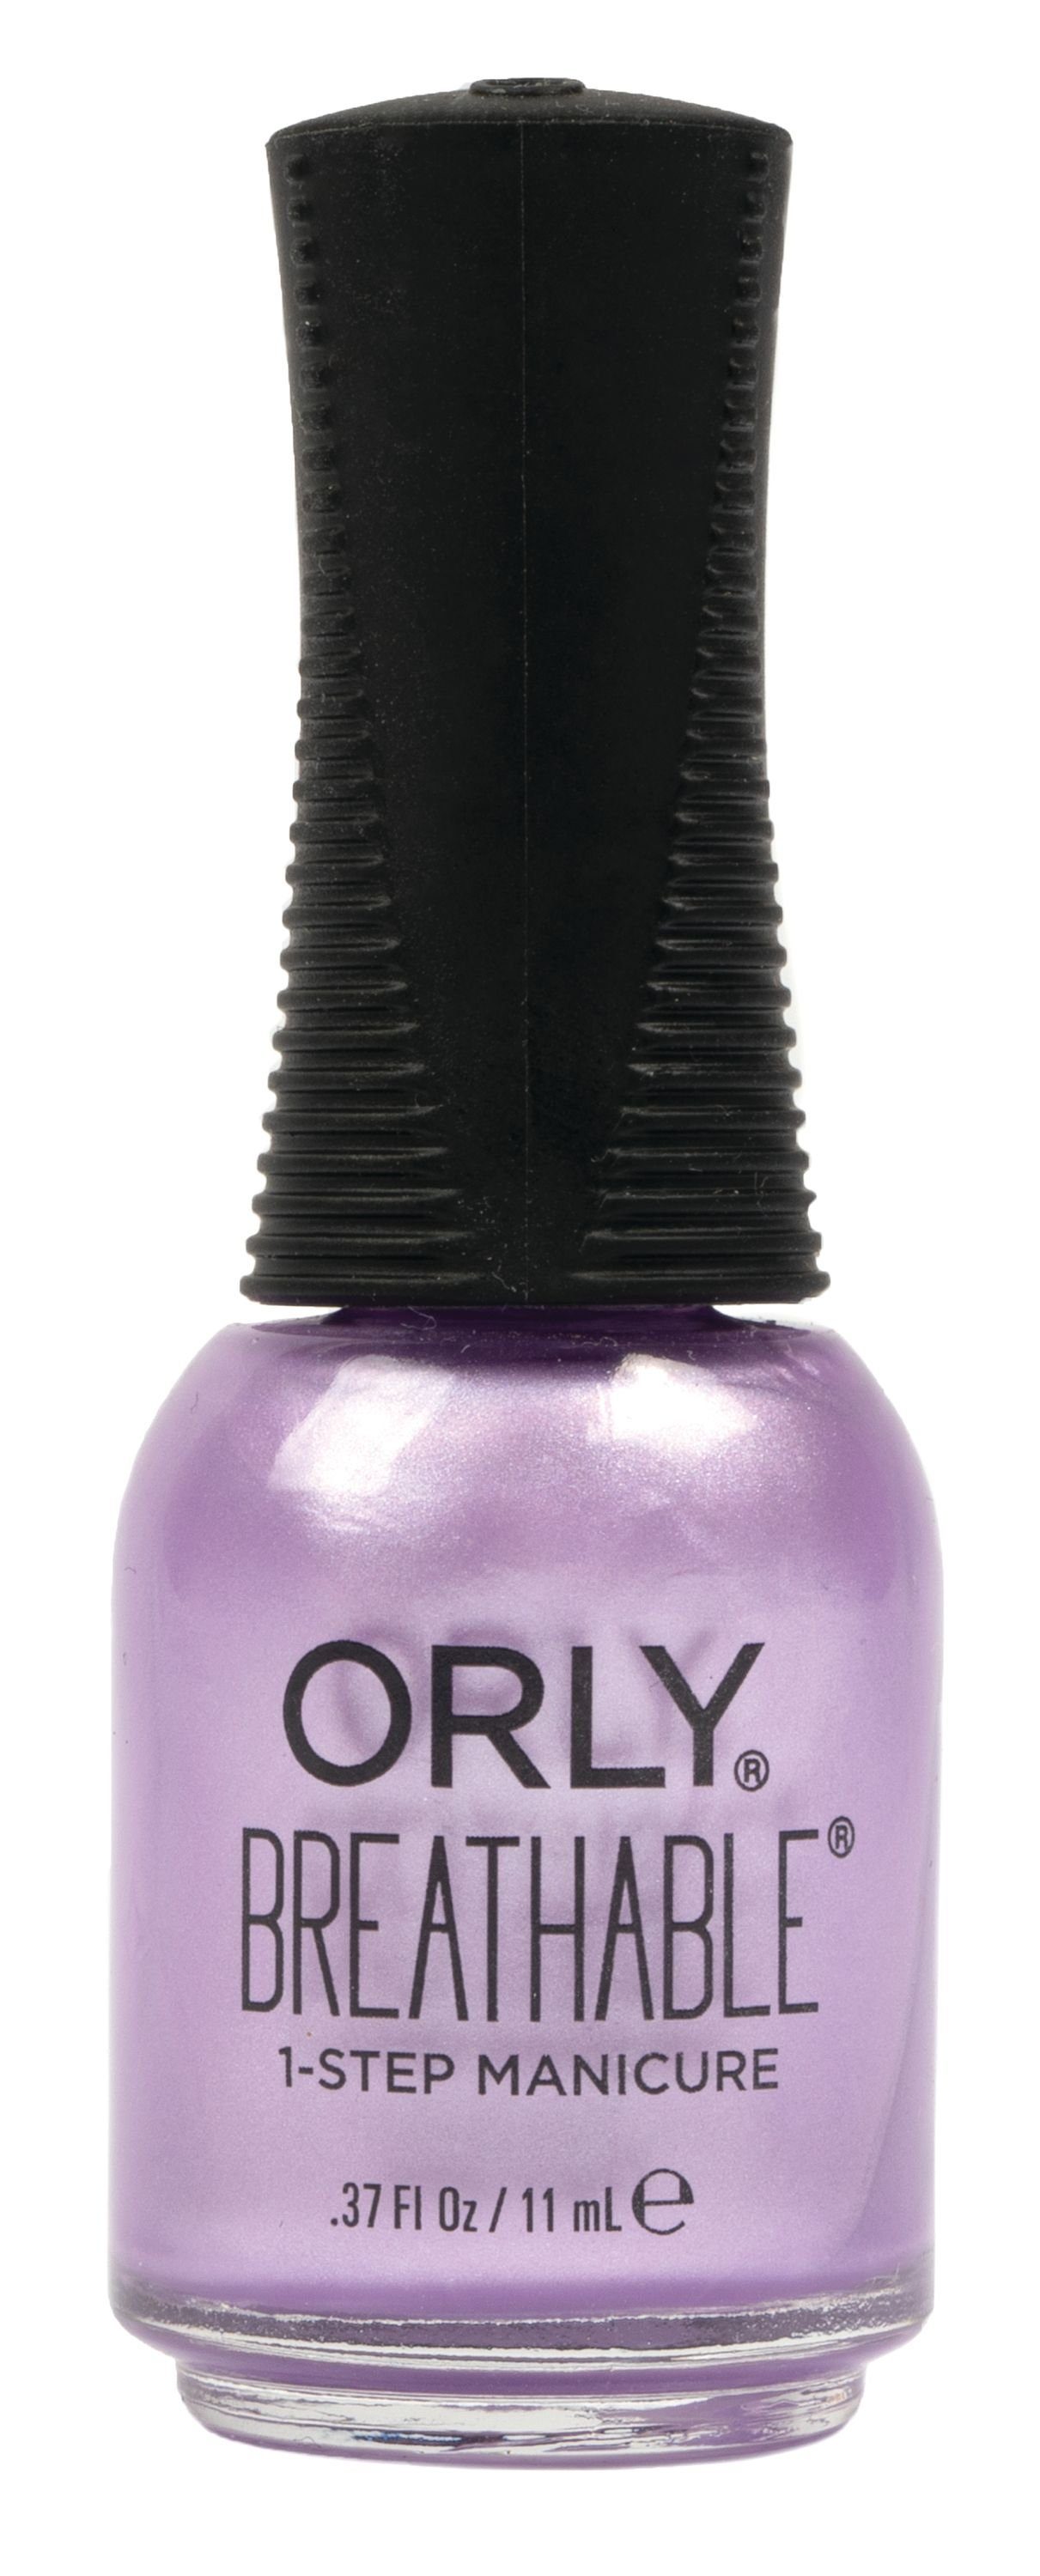 ORLY Nagellack ORLY Breathable ml JUST 11 SQUID-ING